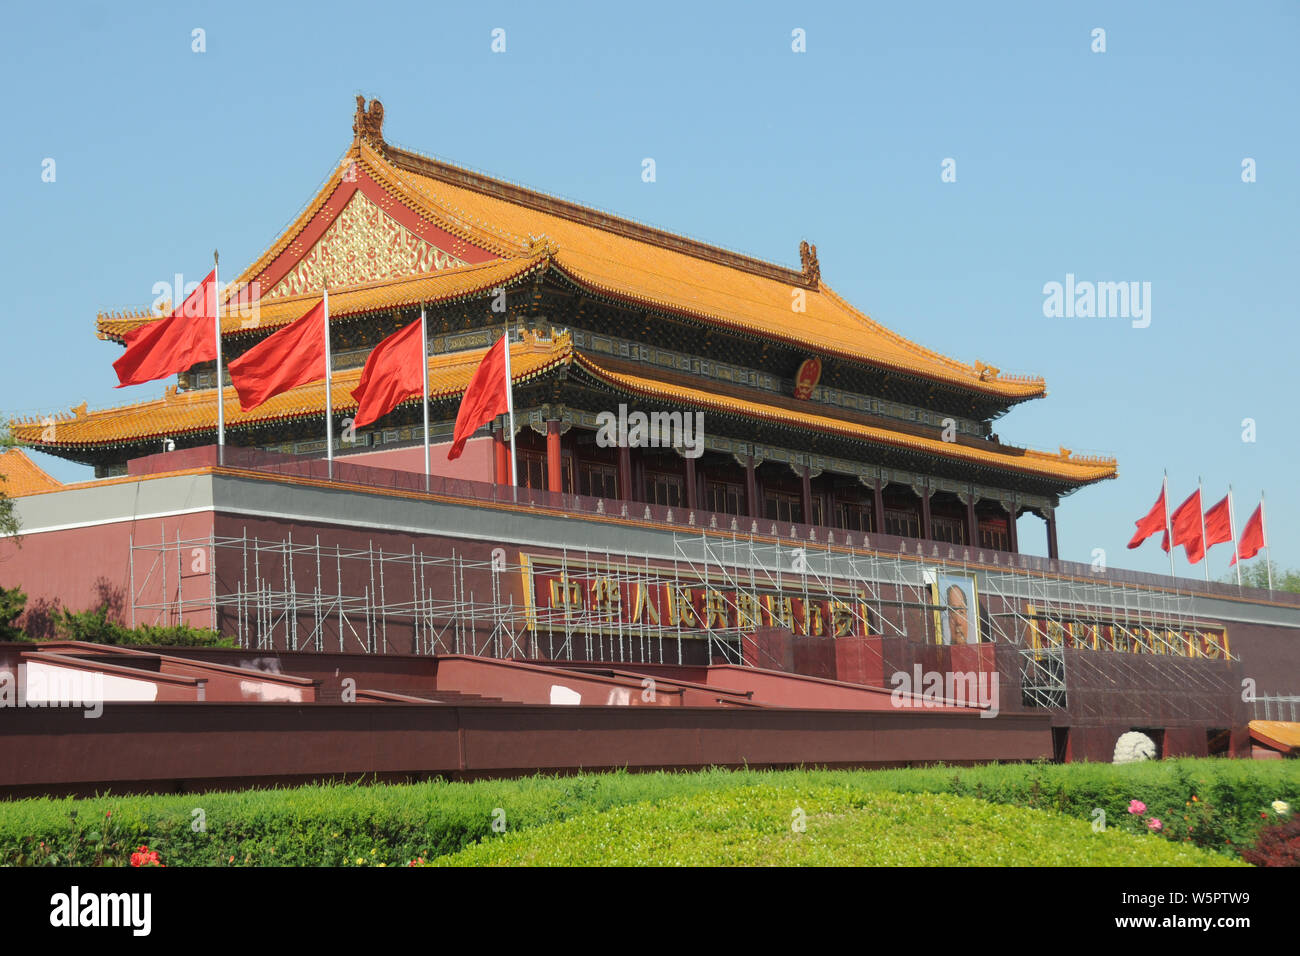 Scaffoldings are built in front of the Tiananmen Rostrum for a renovation project in Beijing, China, 6 May 2019. Stock Photo